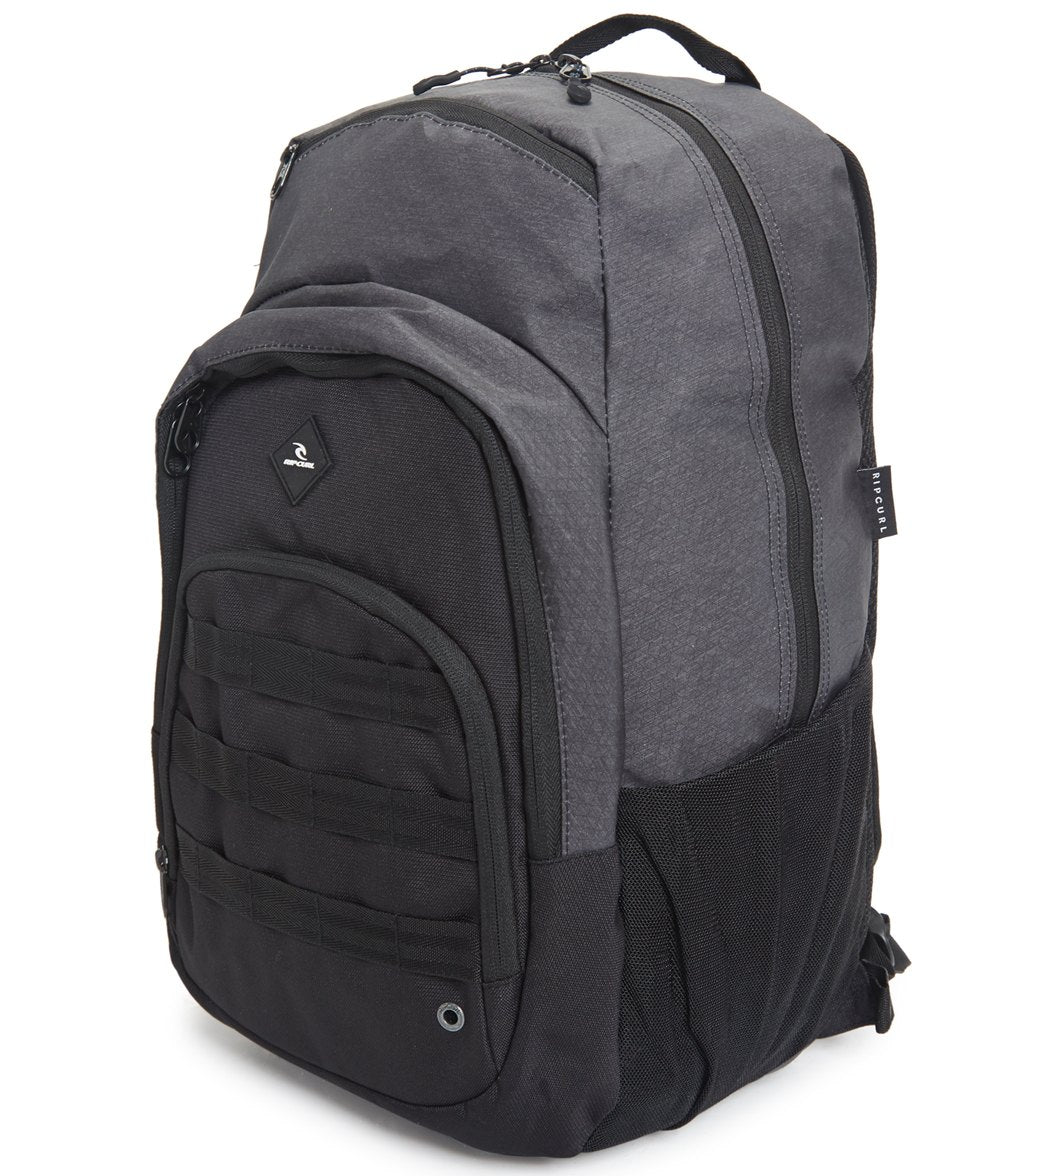 Rip Curl, Rip Curl Overtime Backpack Midnight